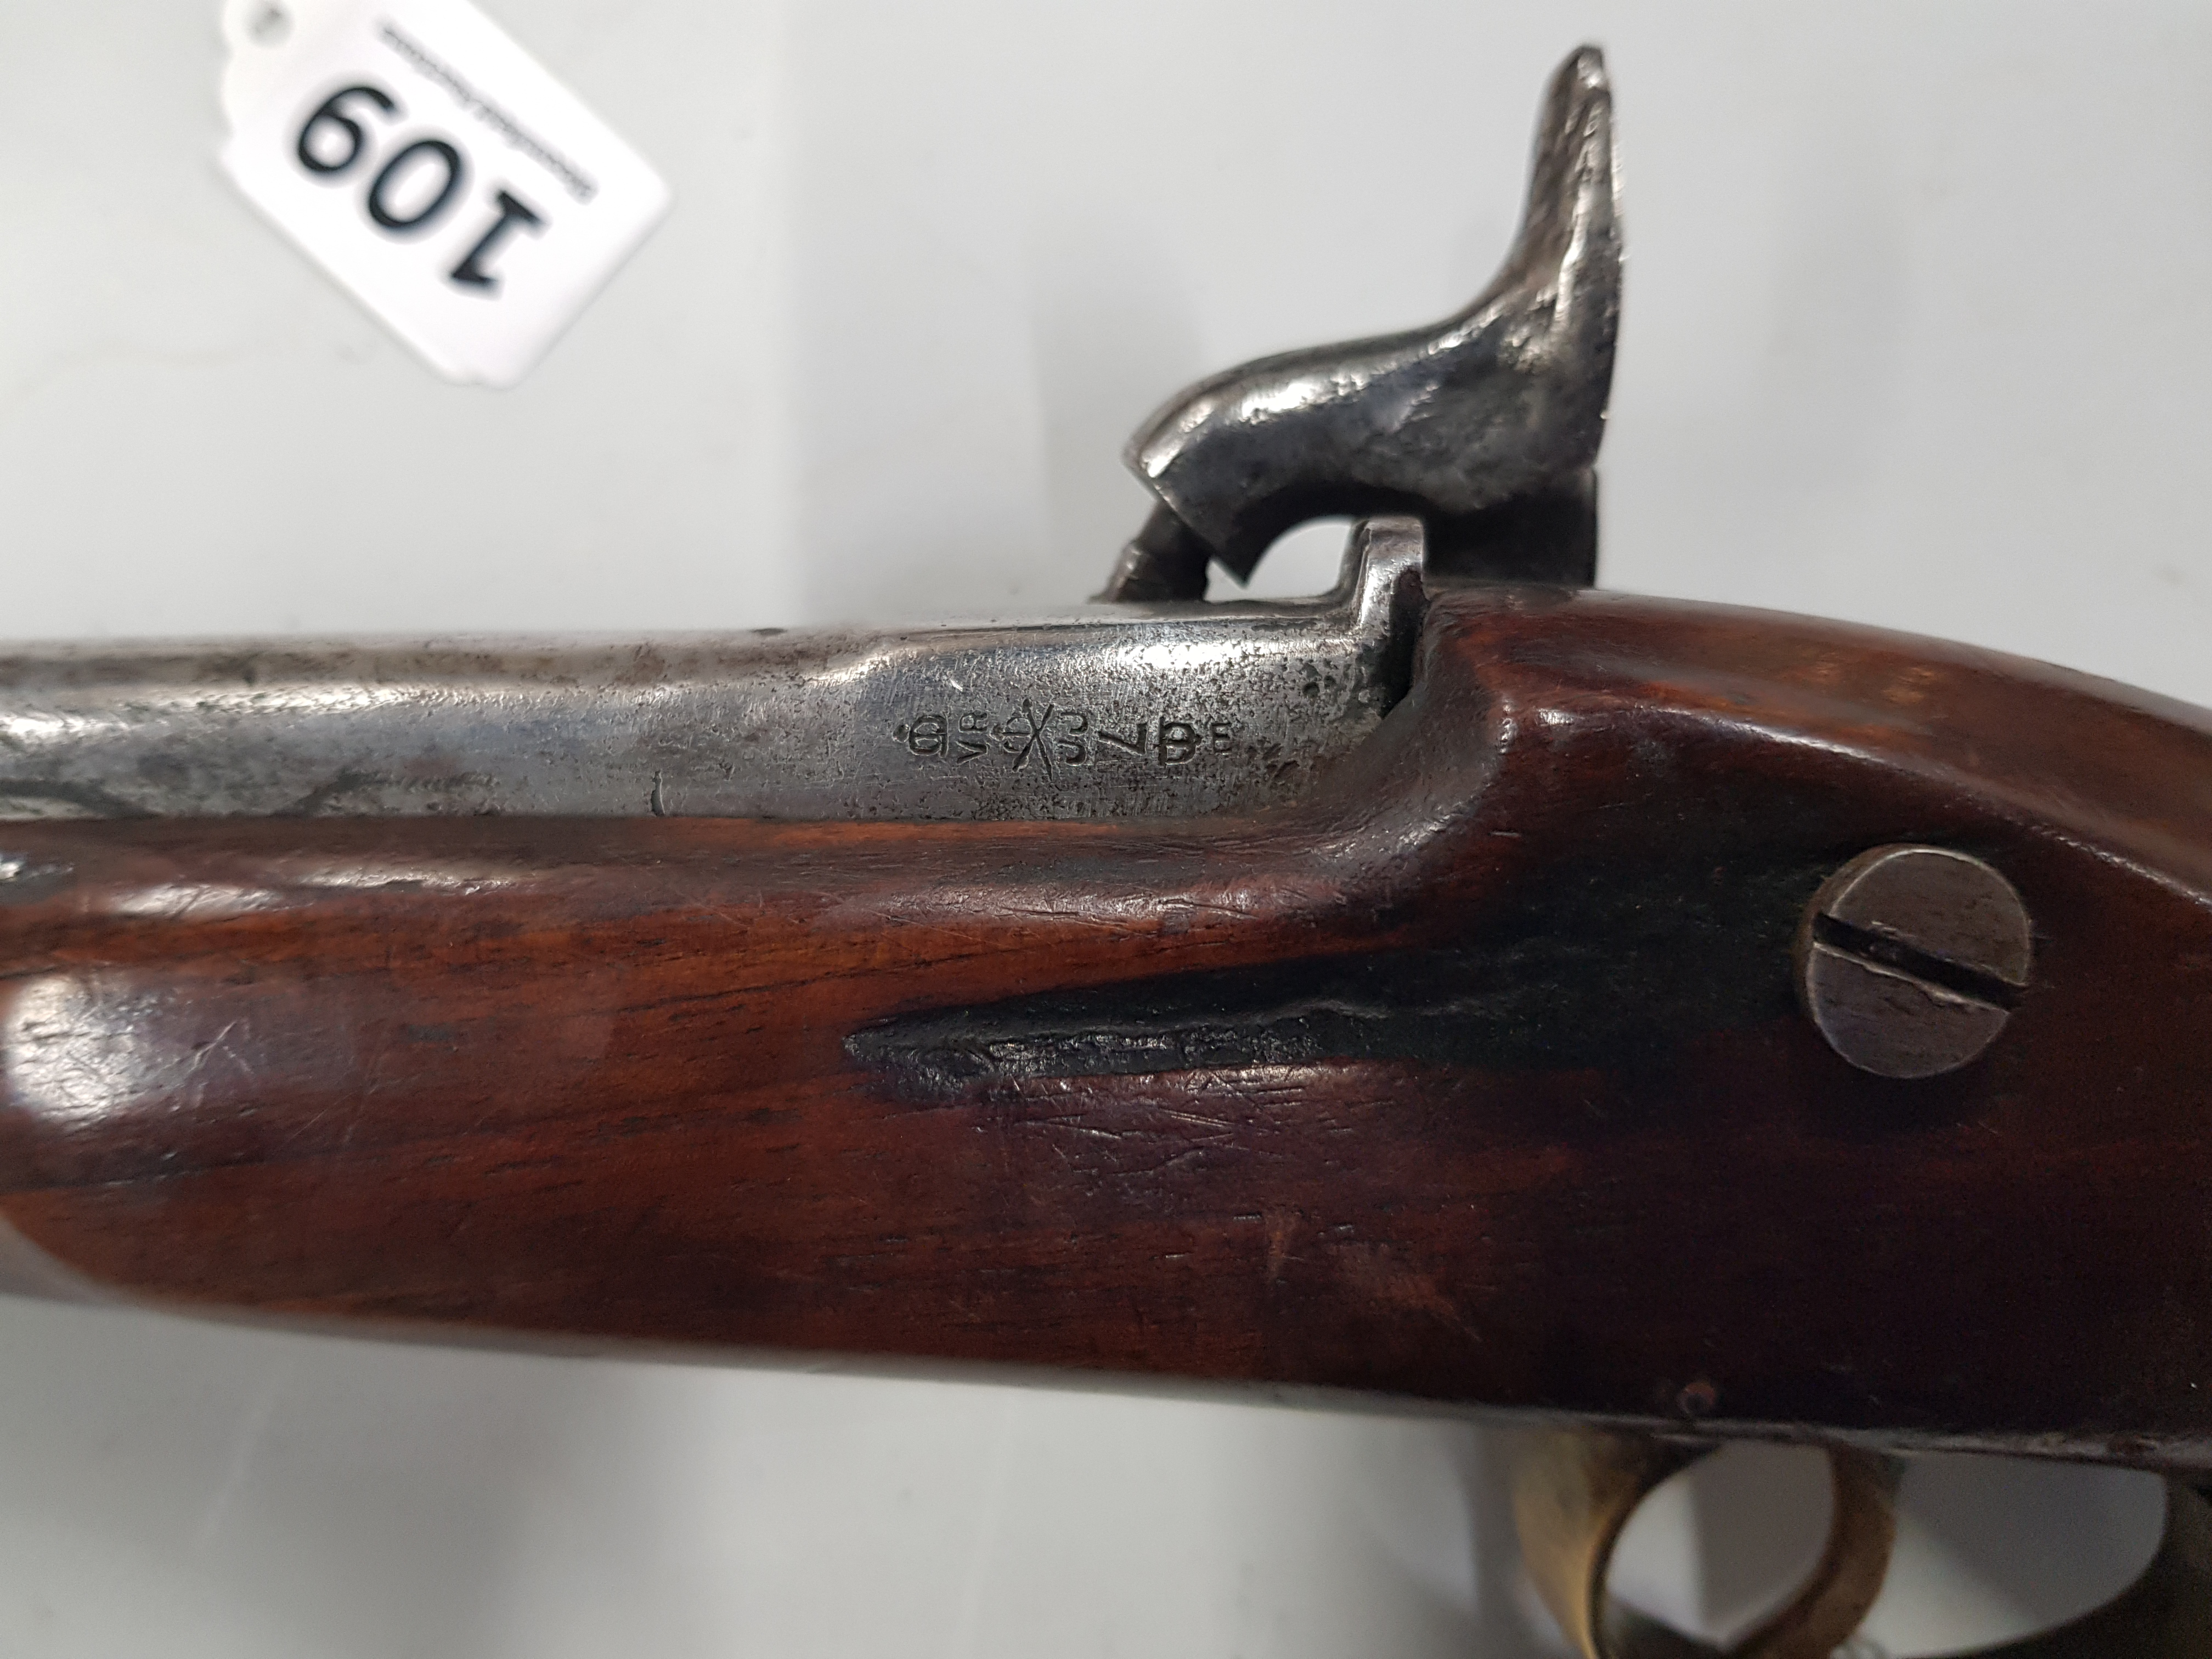 1858 ENFIELD NAVAL PISTOL WITH BRASS FURNITURE - Image 7 of 8